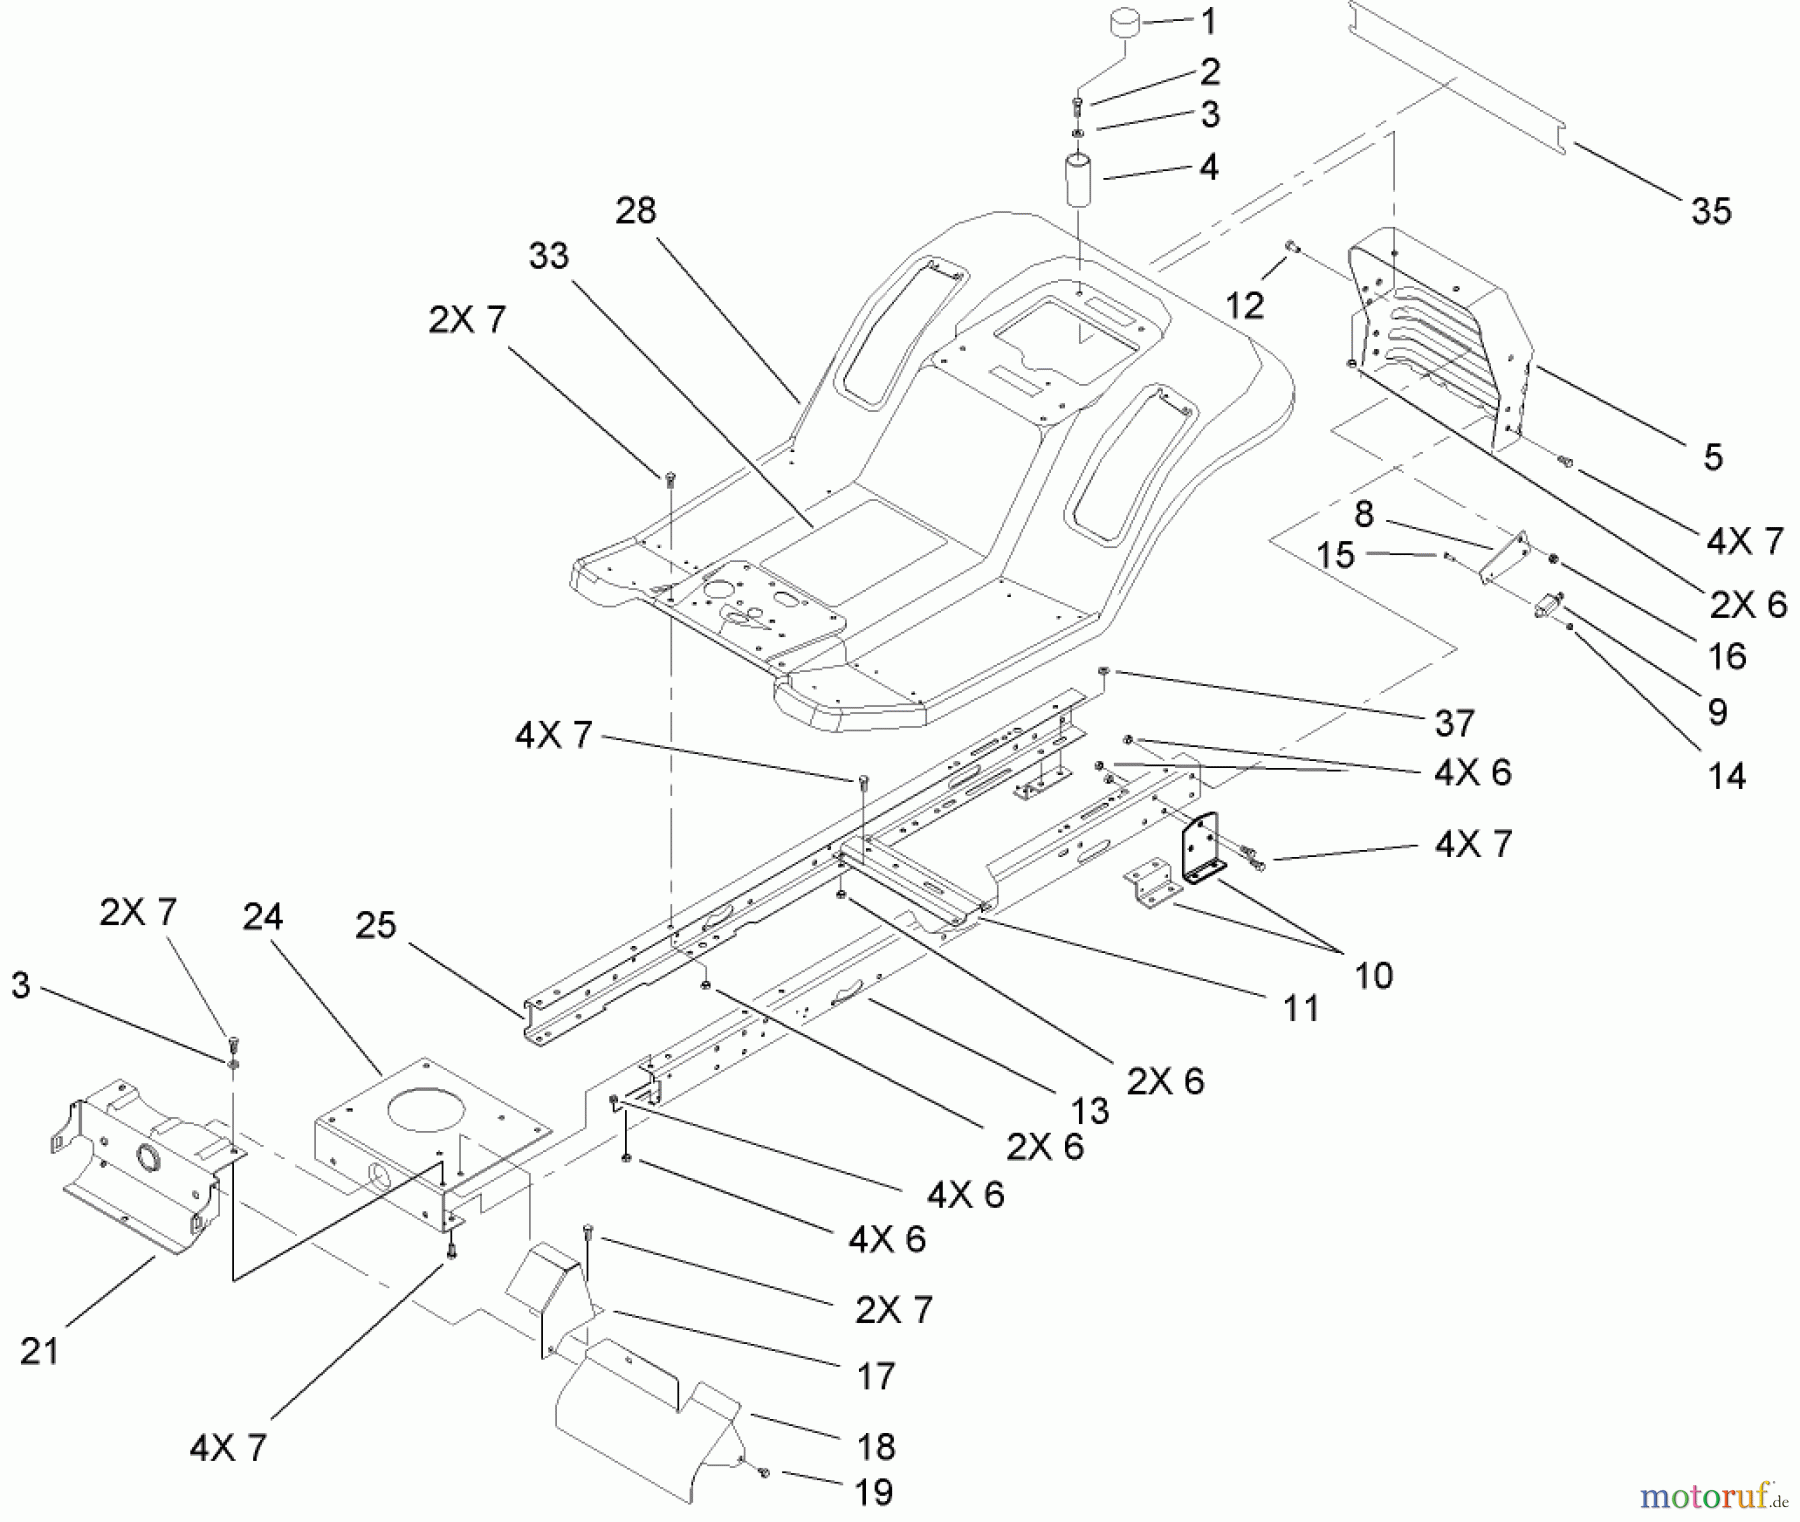  Toro Neu Mowers, Lawn & Garden Tractor Seite 1 71199 (12-32XL) - Toro 12-32XL Lawn Tractor, 2003 (230000001-230999999) FRAME AND REAR BODY ASSEMBLY